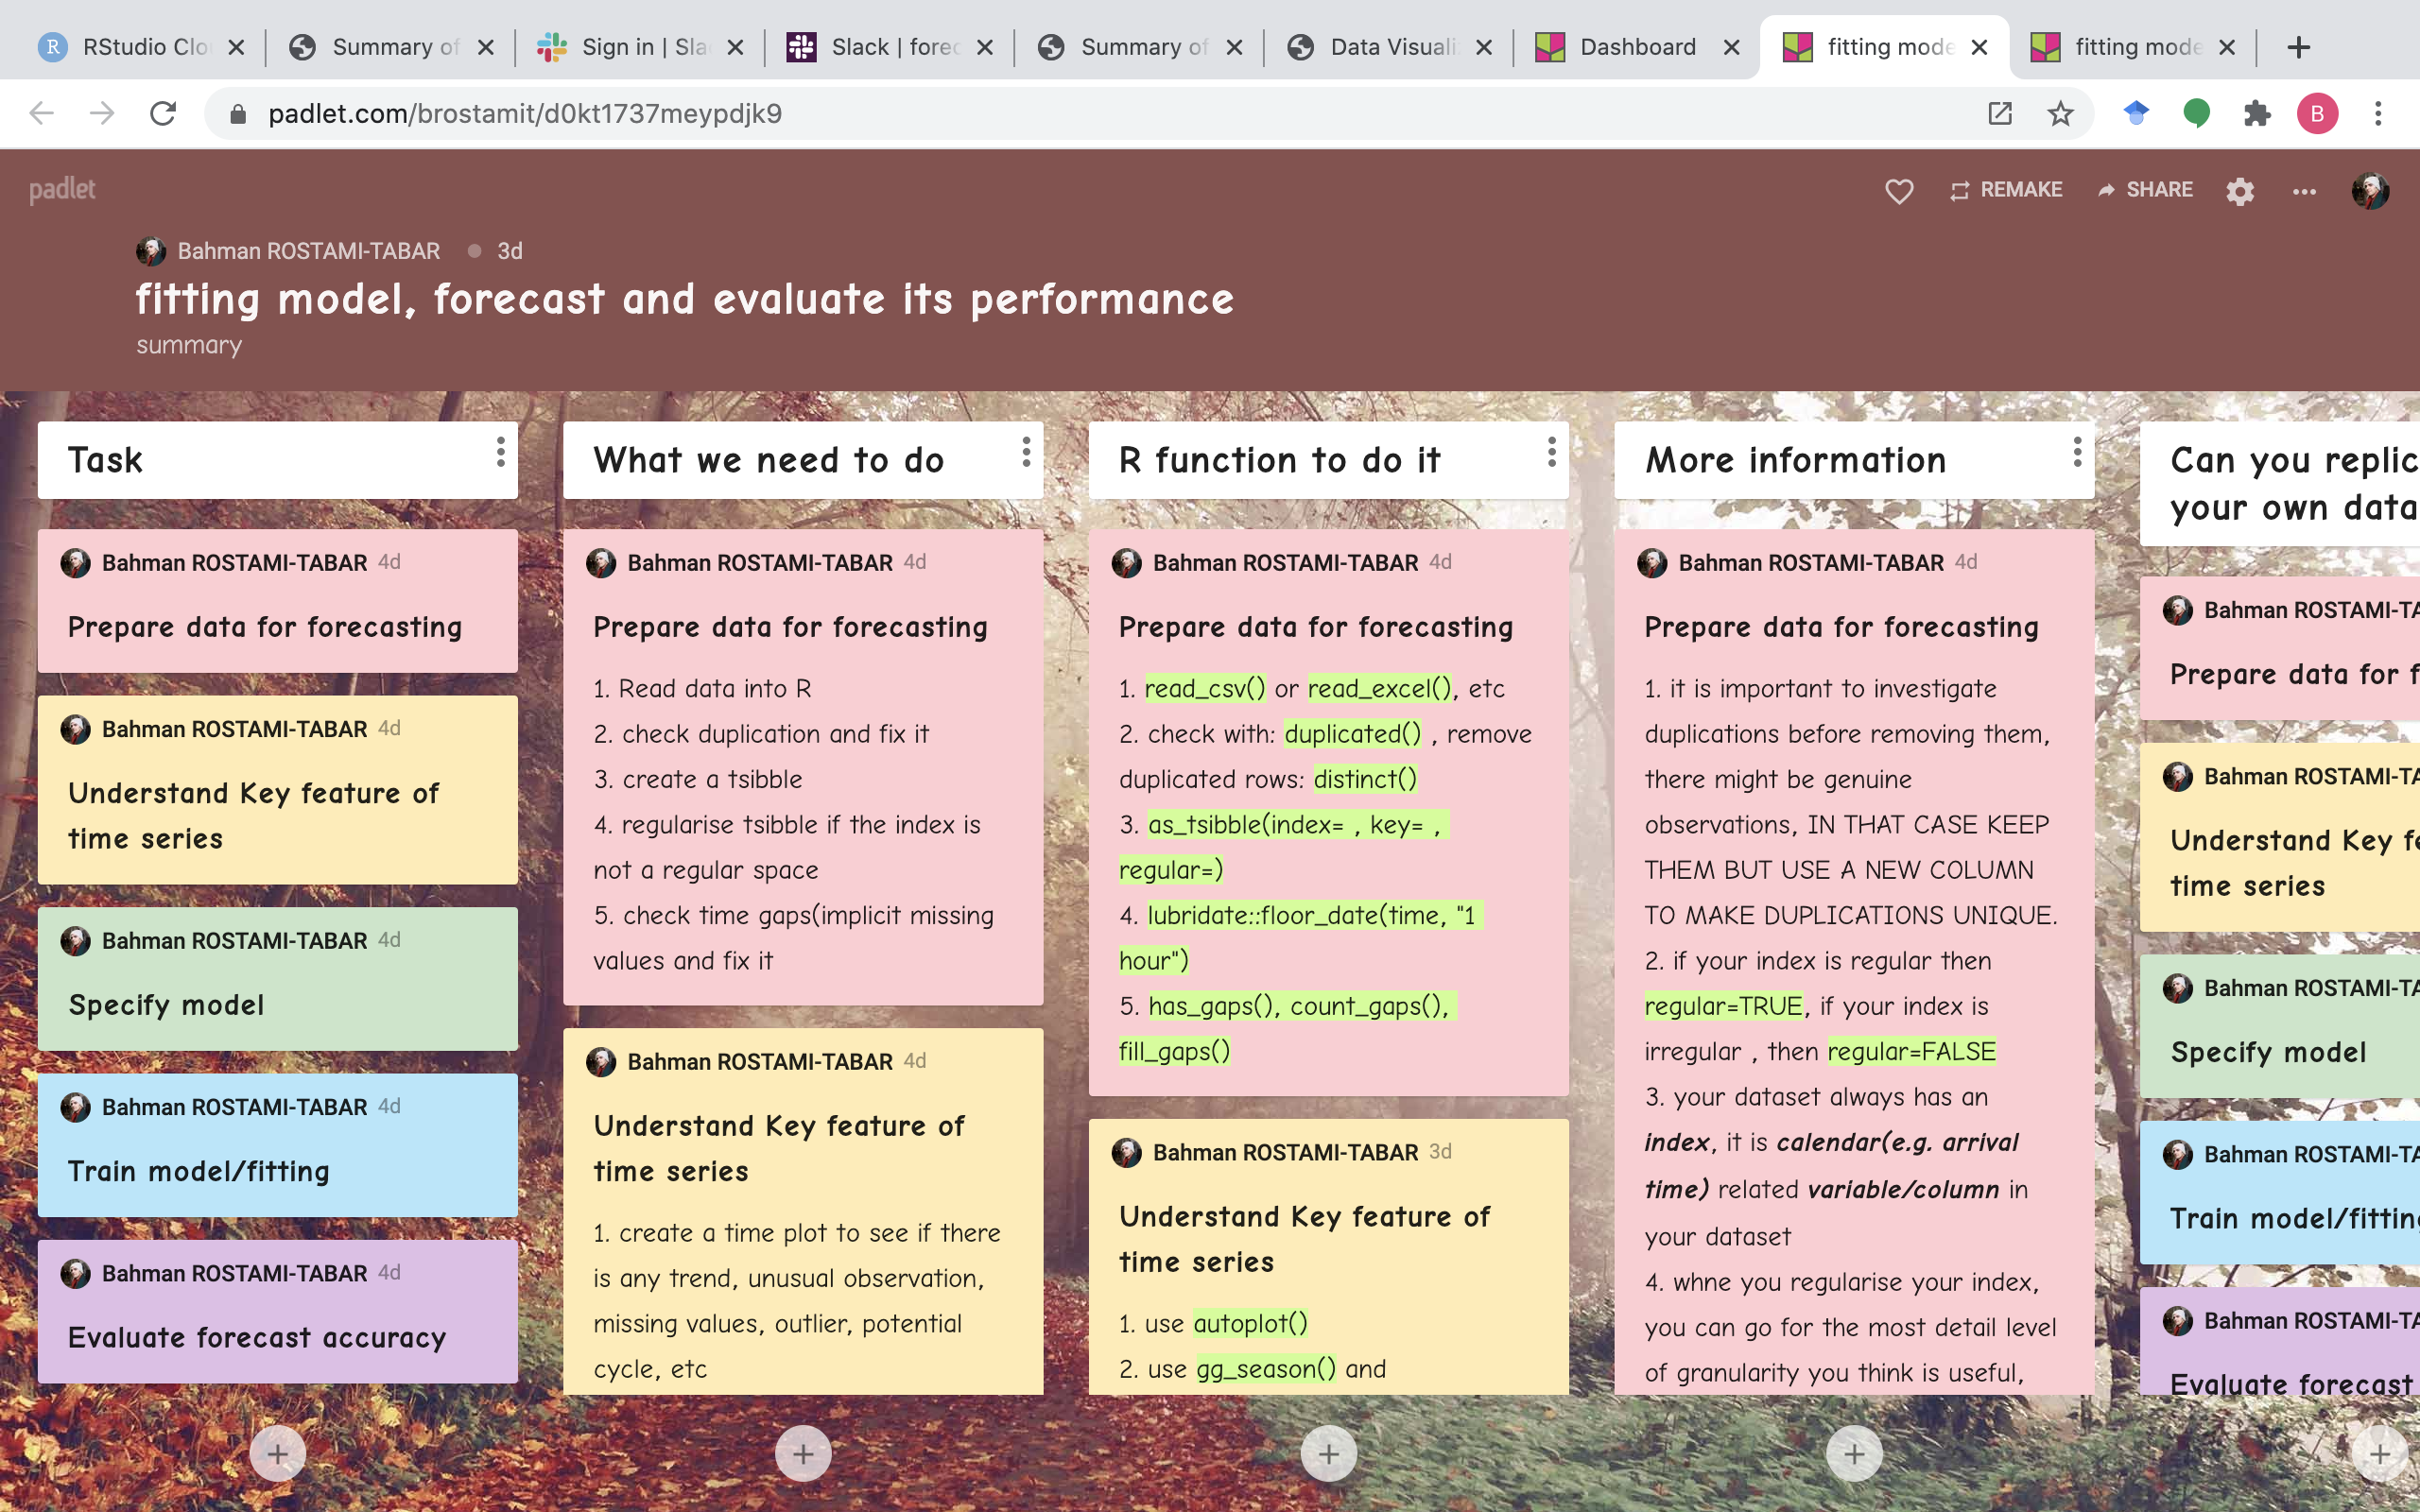 Using a Padlet shelf to summarises the practical steps in forecasting task in R